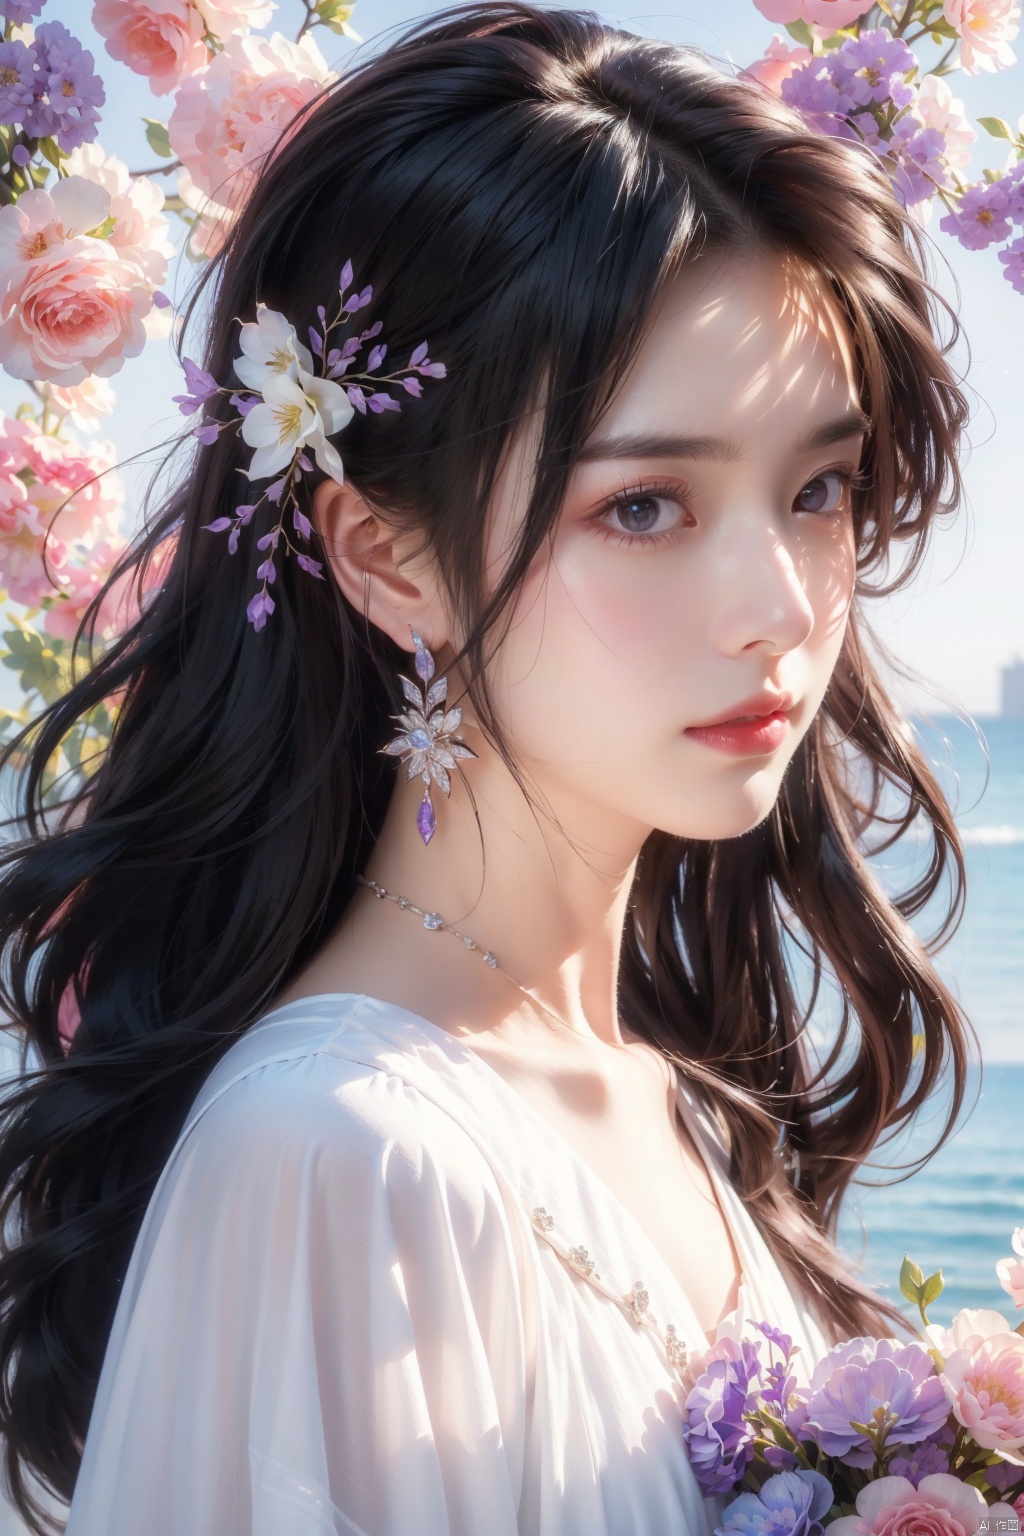  (best quality, high resolution, masterpiece:1.2), beautiful noble girl dynamic half-length portrait, elegant black hair elegantly coiled up, clear purple eyes, exquisite floral arrangement on the hair, crystalline jewelry strands, ultra-detailed, upgraded.